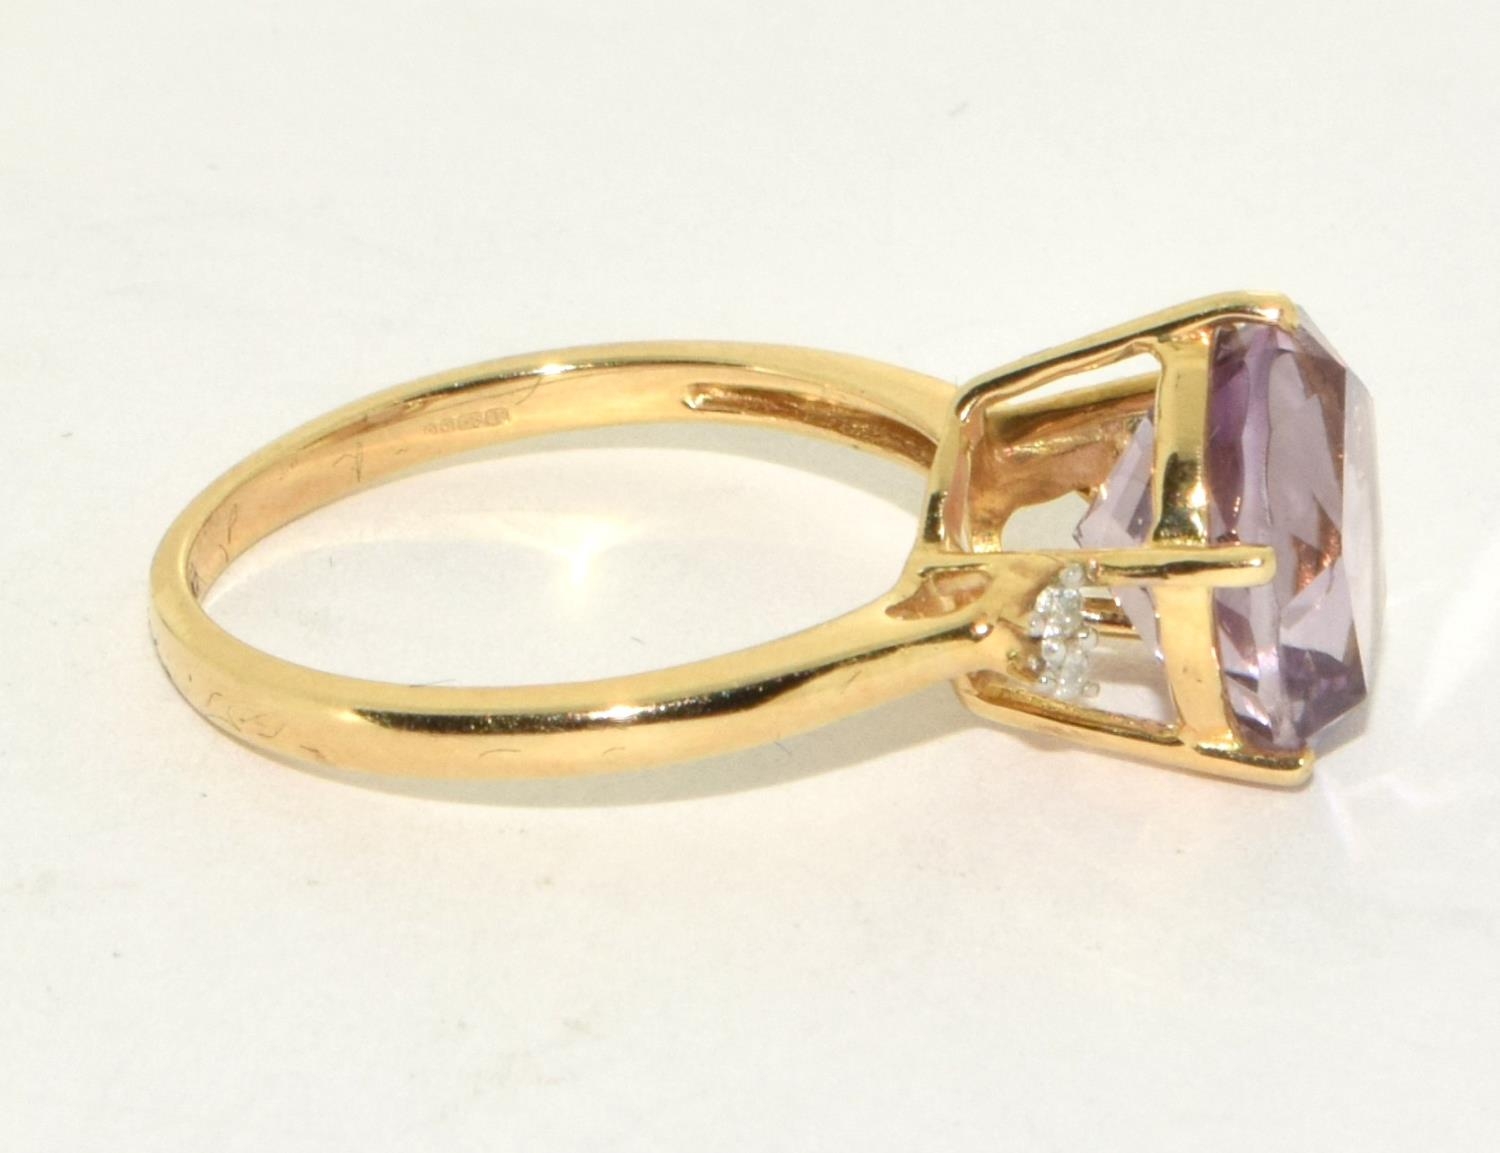 9ct gold ladies Large Amethyst solitaire with of set Diamond ring size N - Image 4 of 5